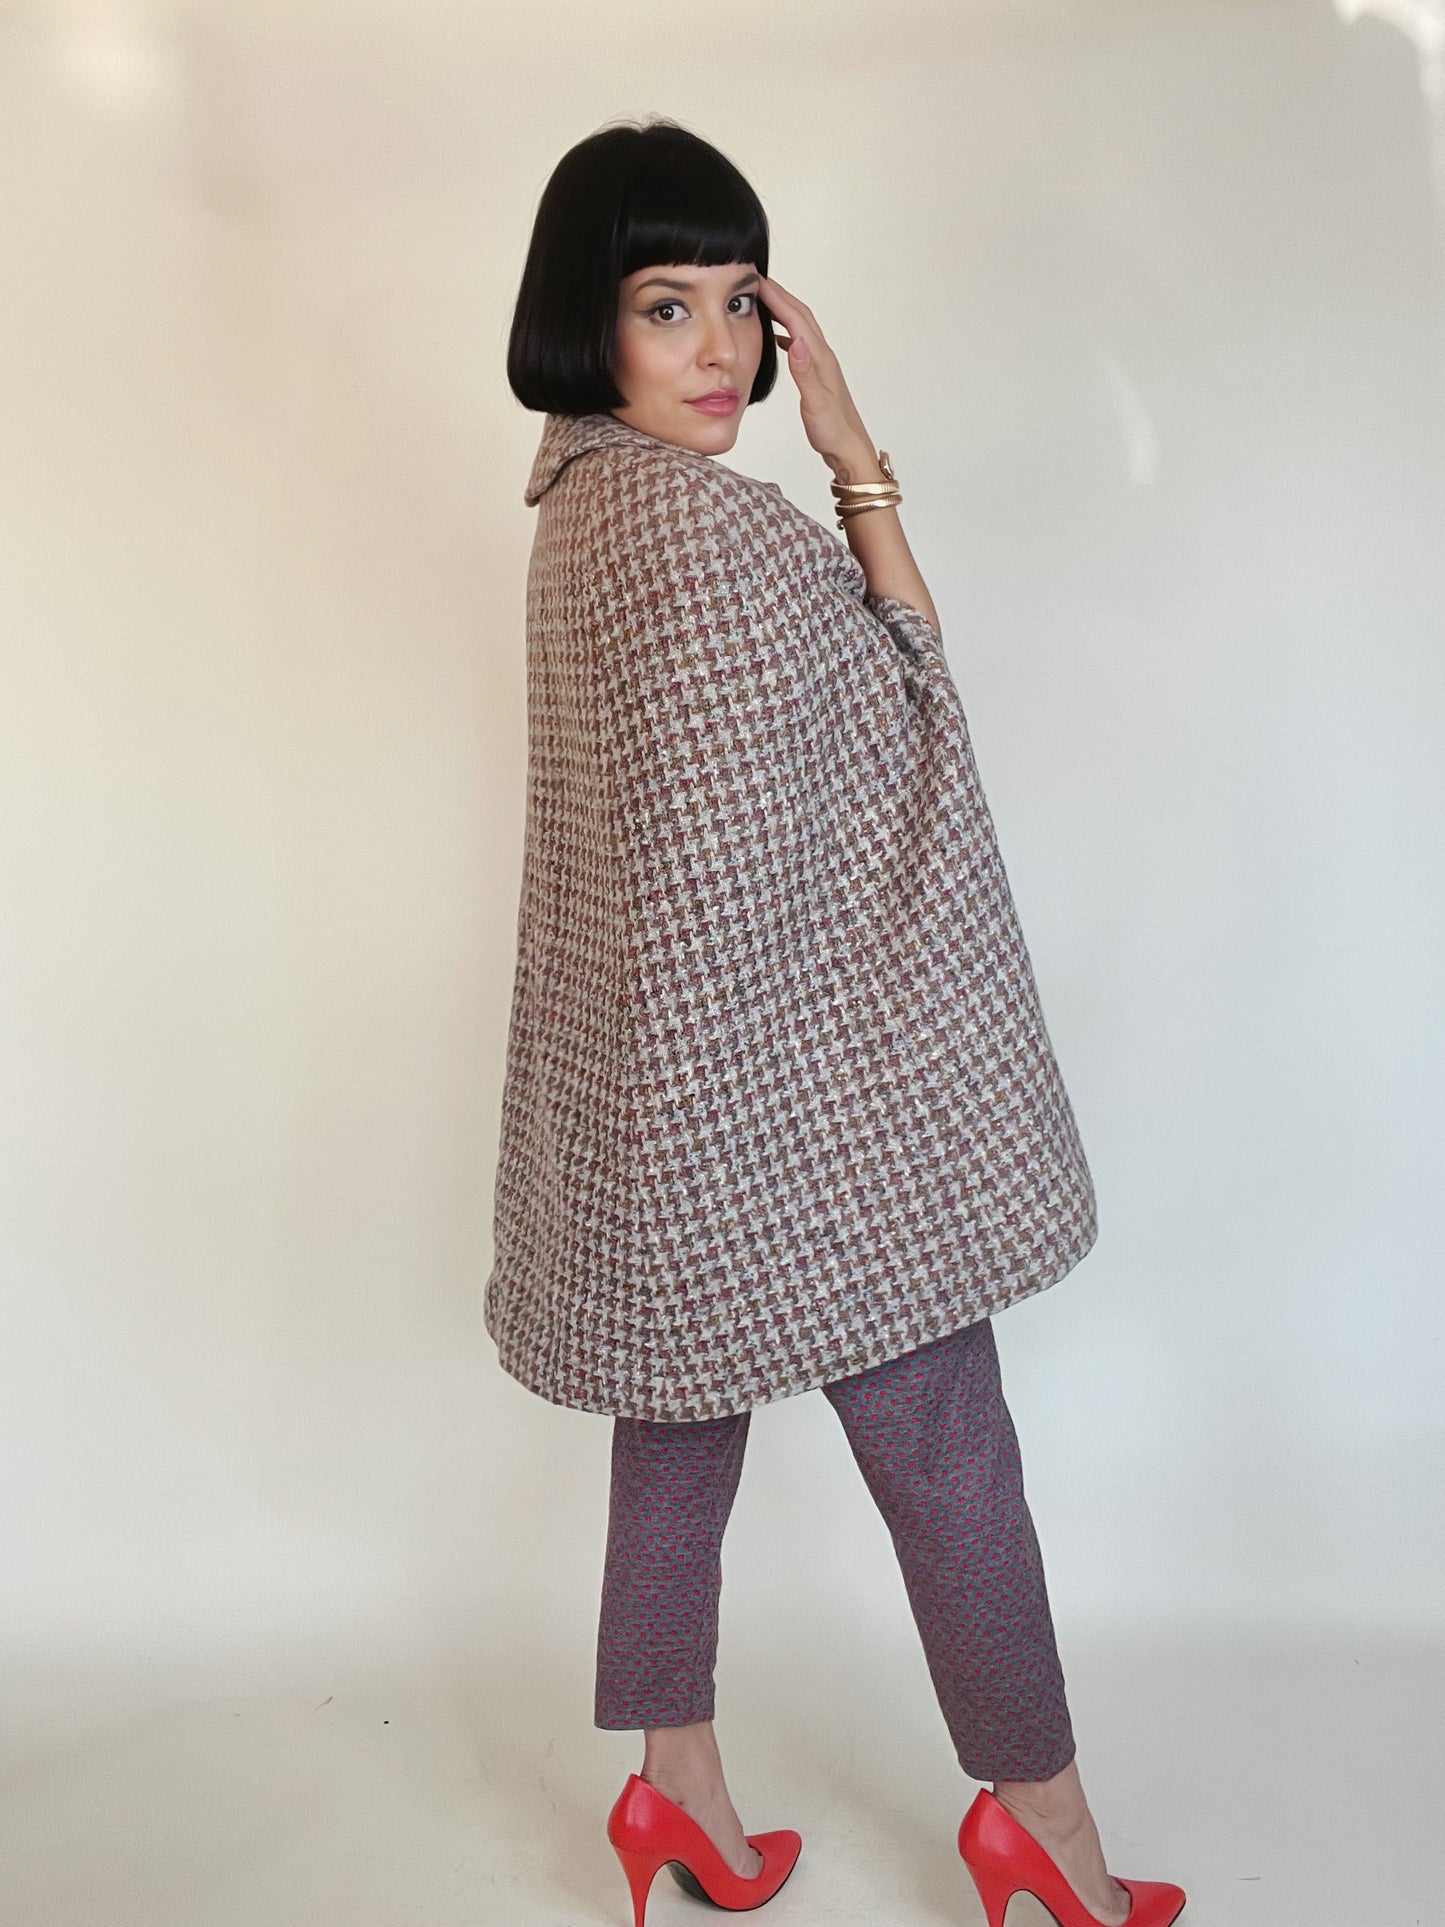 Vintage 60s Tweed Cape Poncho Fits One Size